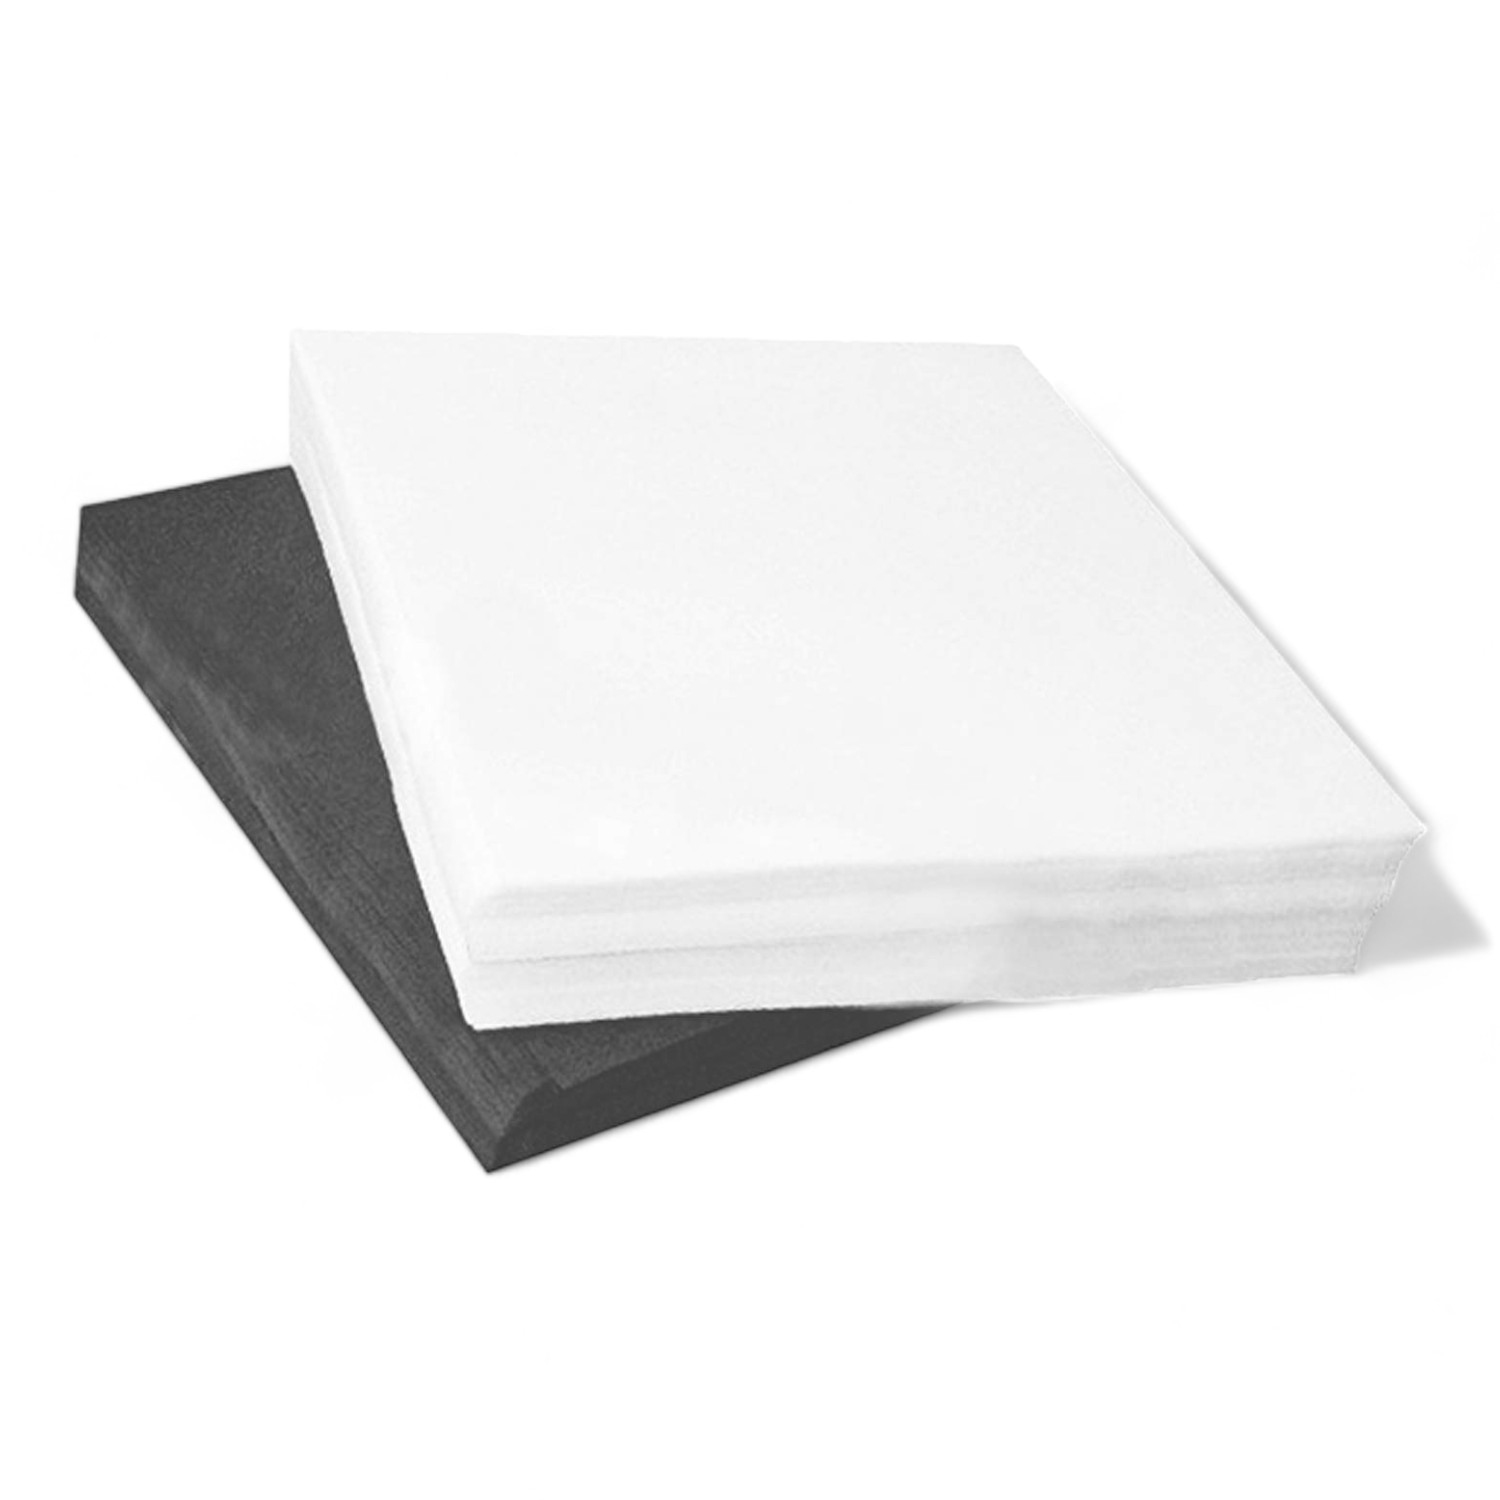 EcoPrint Test Sheets - 25 Pack | White 15" x 15" | Disposable Screen Printing Pellons | Ideal for Ink Testing & Pallet Protection | Screen Printin